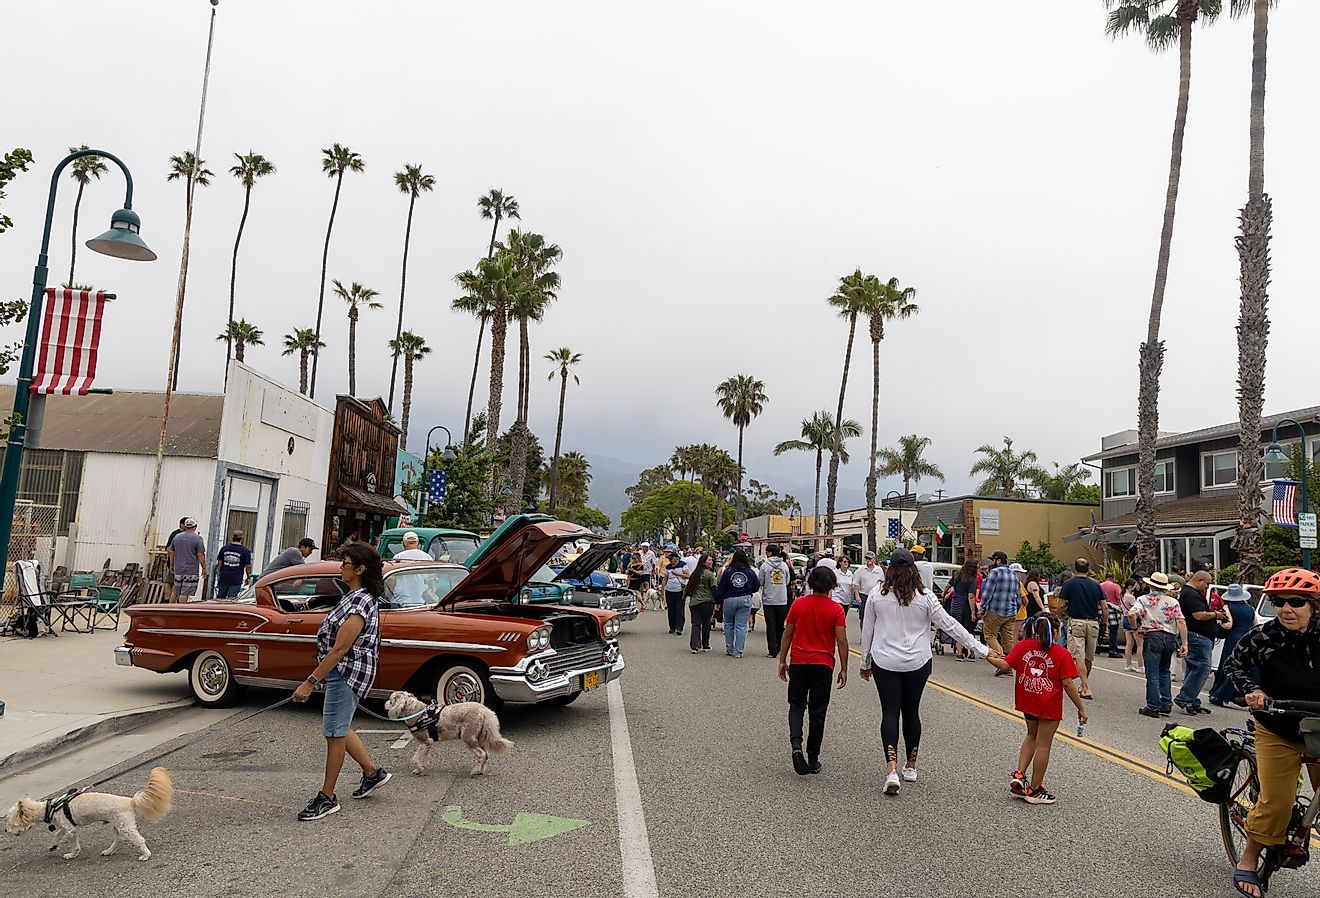 Rods and Roses classic holiday car show in Carpinteria, California. Image credit L Paul Mann via Shutterstock